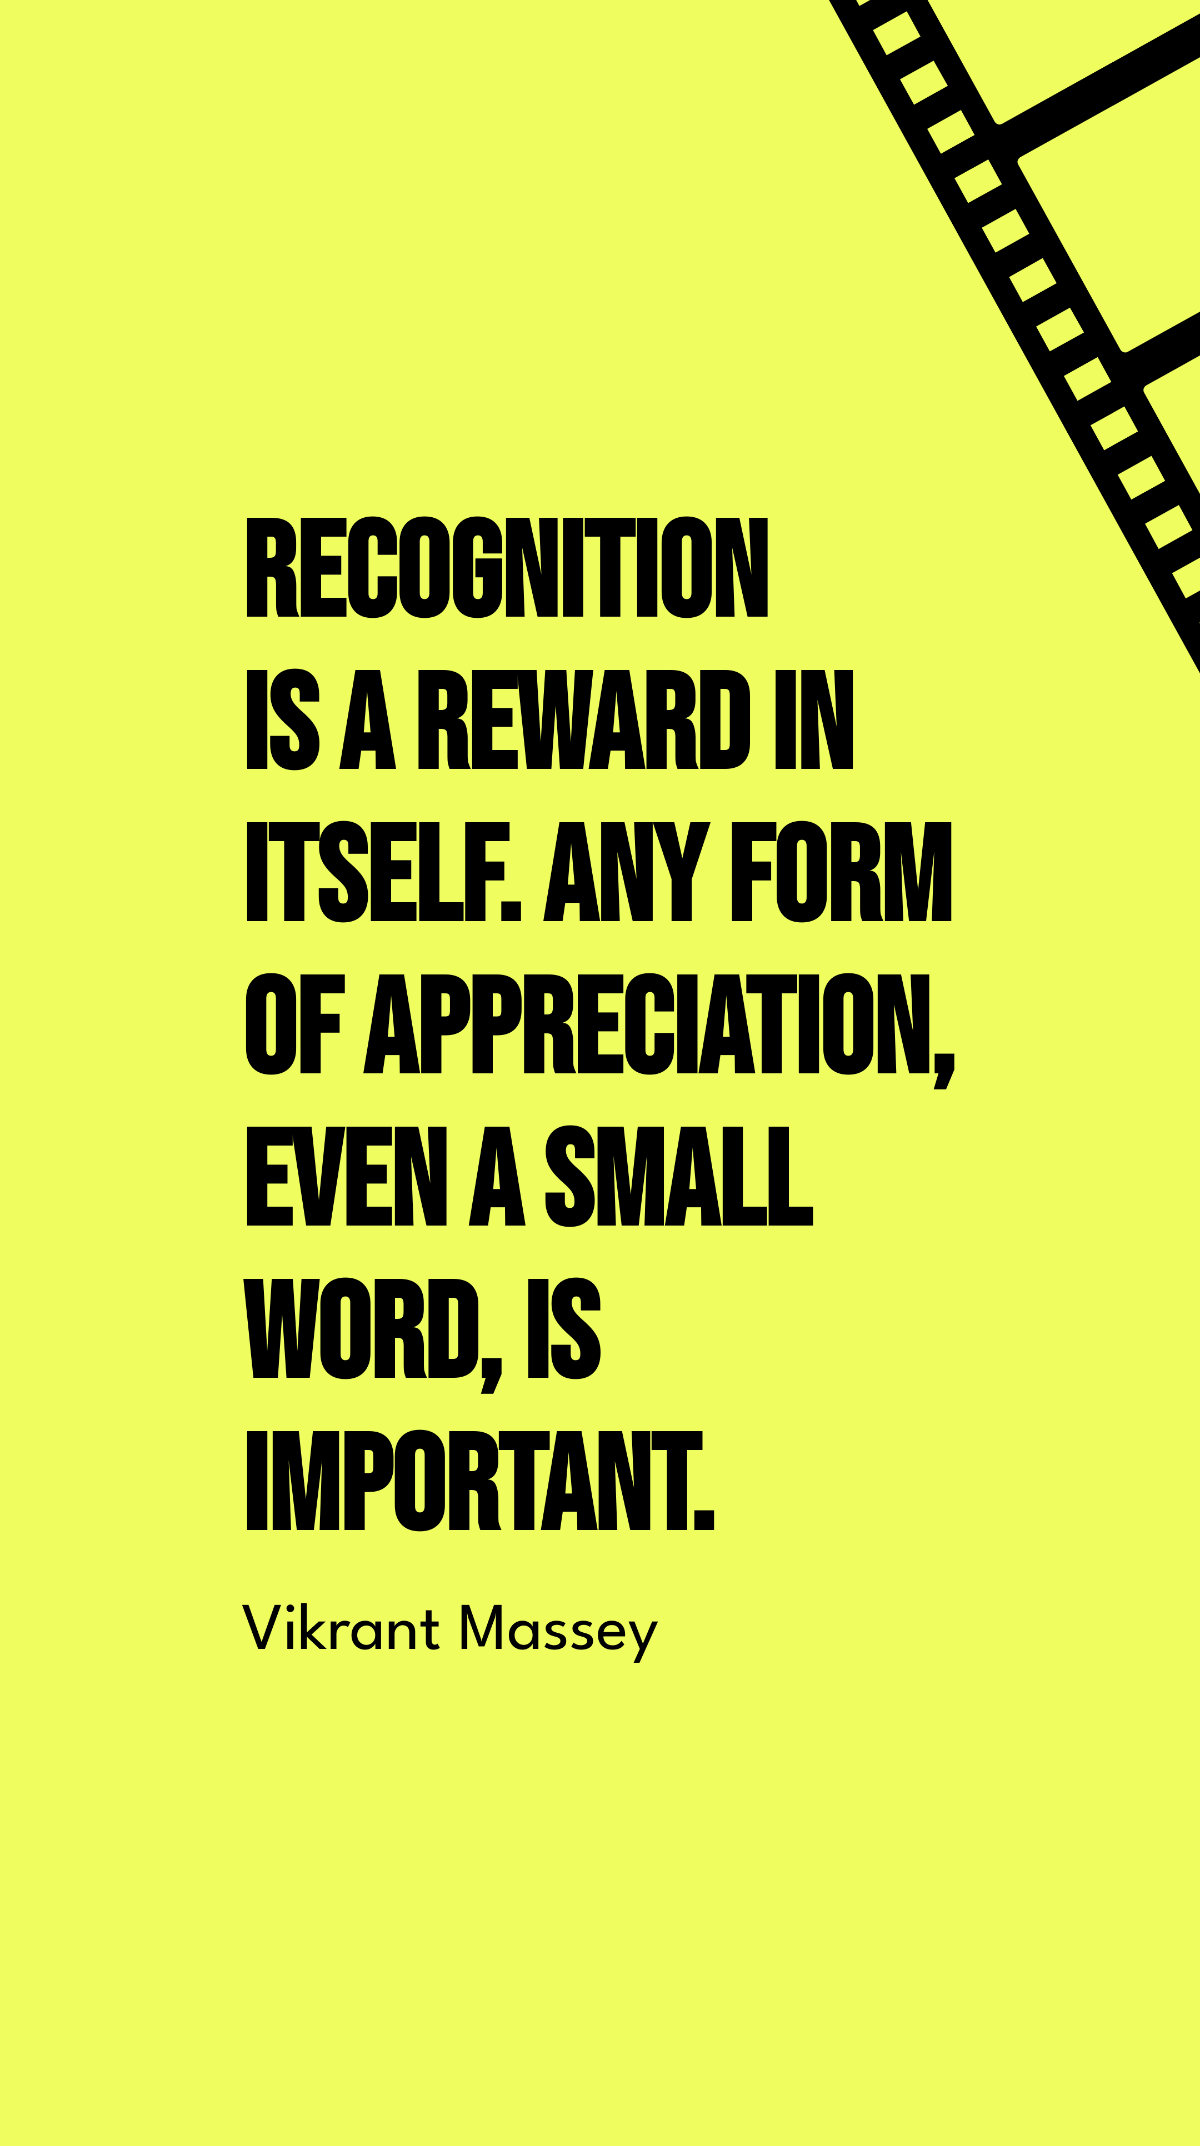 Vikrant Massey - Recognition is a reward in itself. Any form of appreciation, even a small word, is important. Template